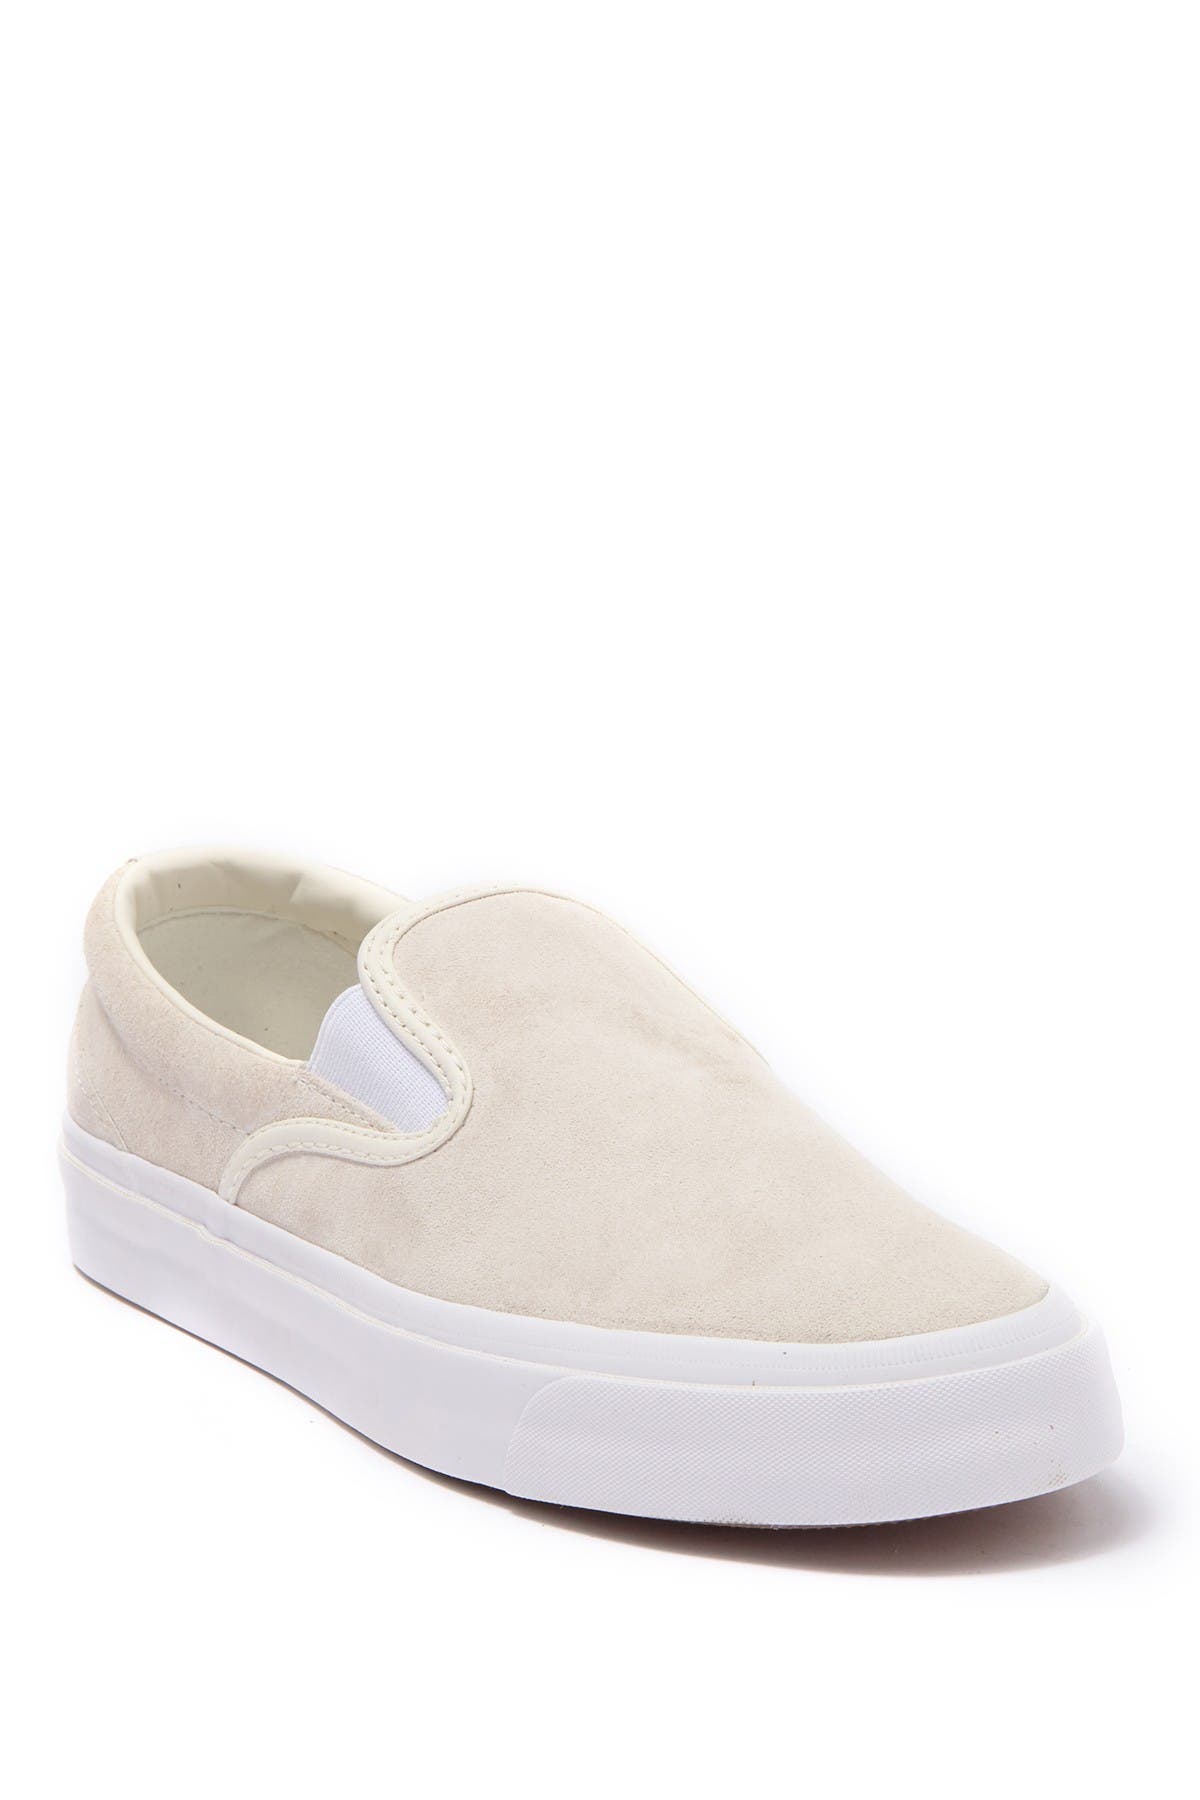 Converse | One Star CC Leather Slip-On 